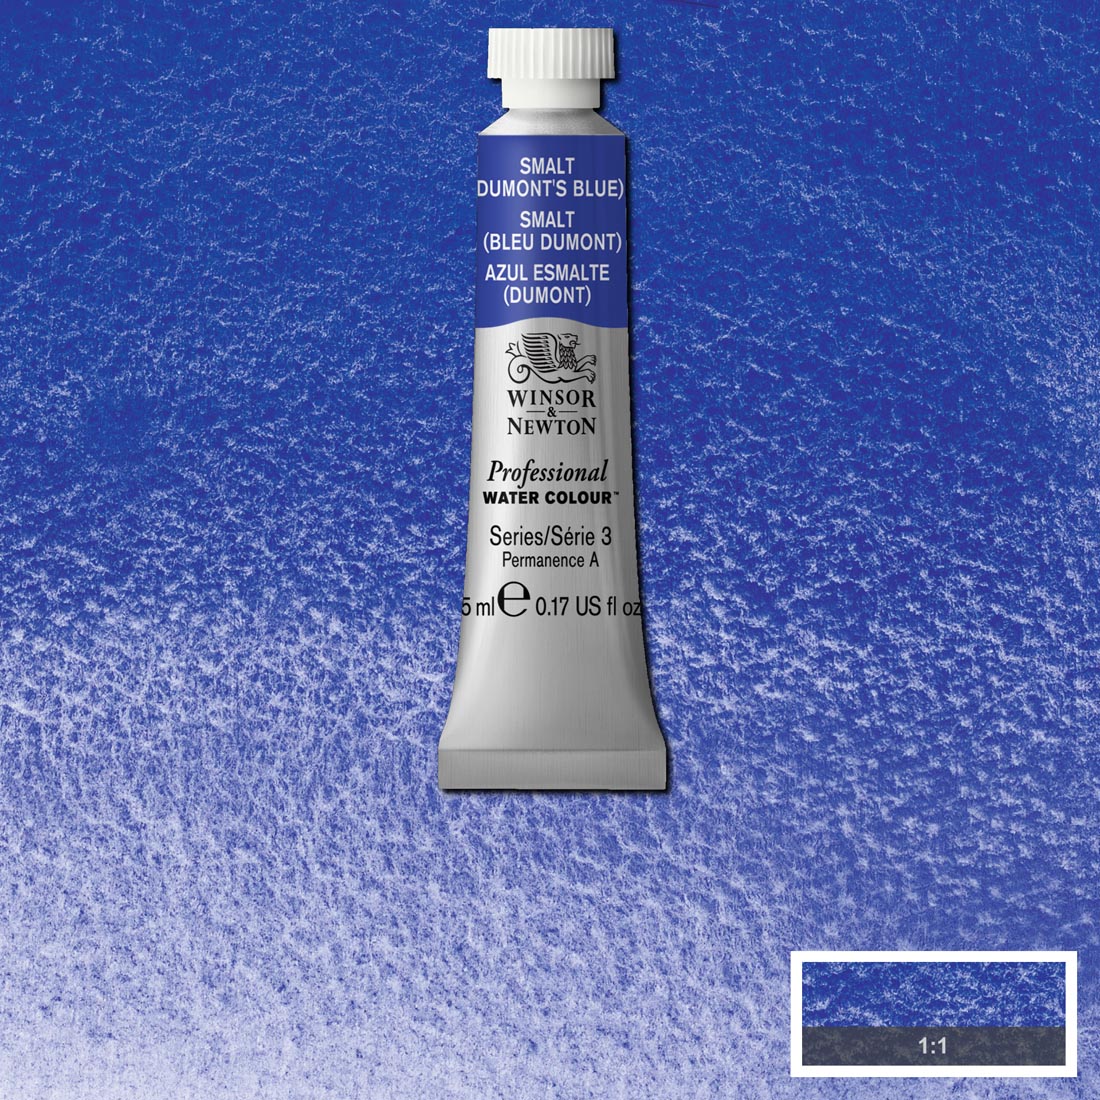 Tube of Smalt (Dumont's Blue) Winsor & Newton Professional Water Colour with a paint swatch for the background